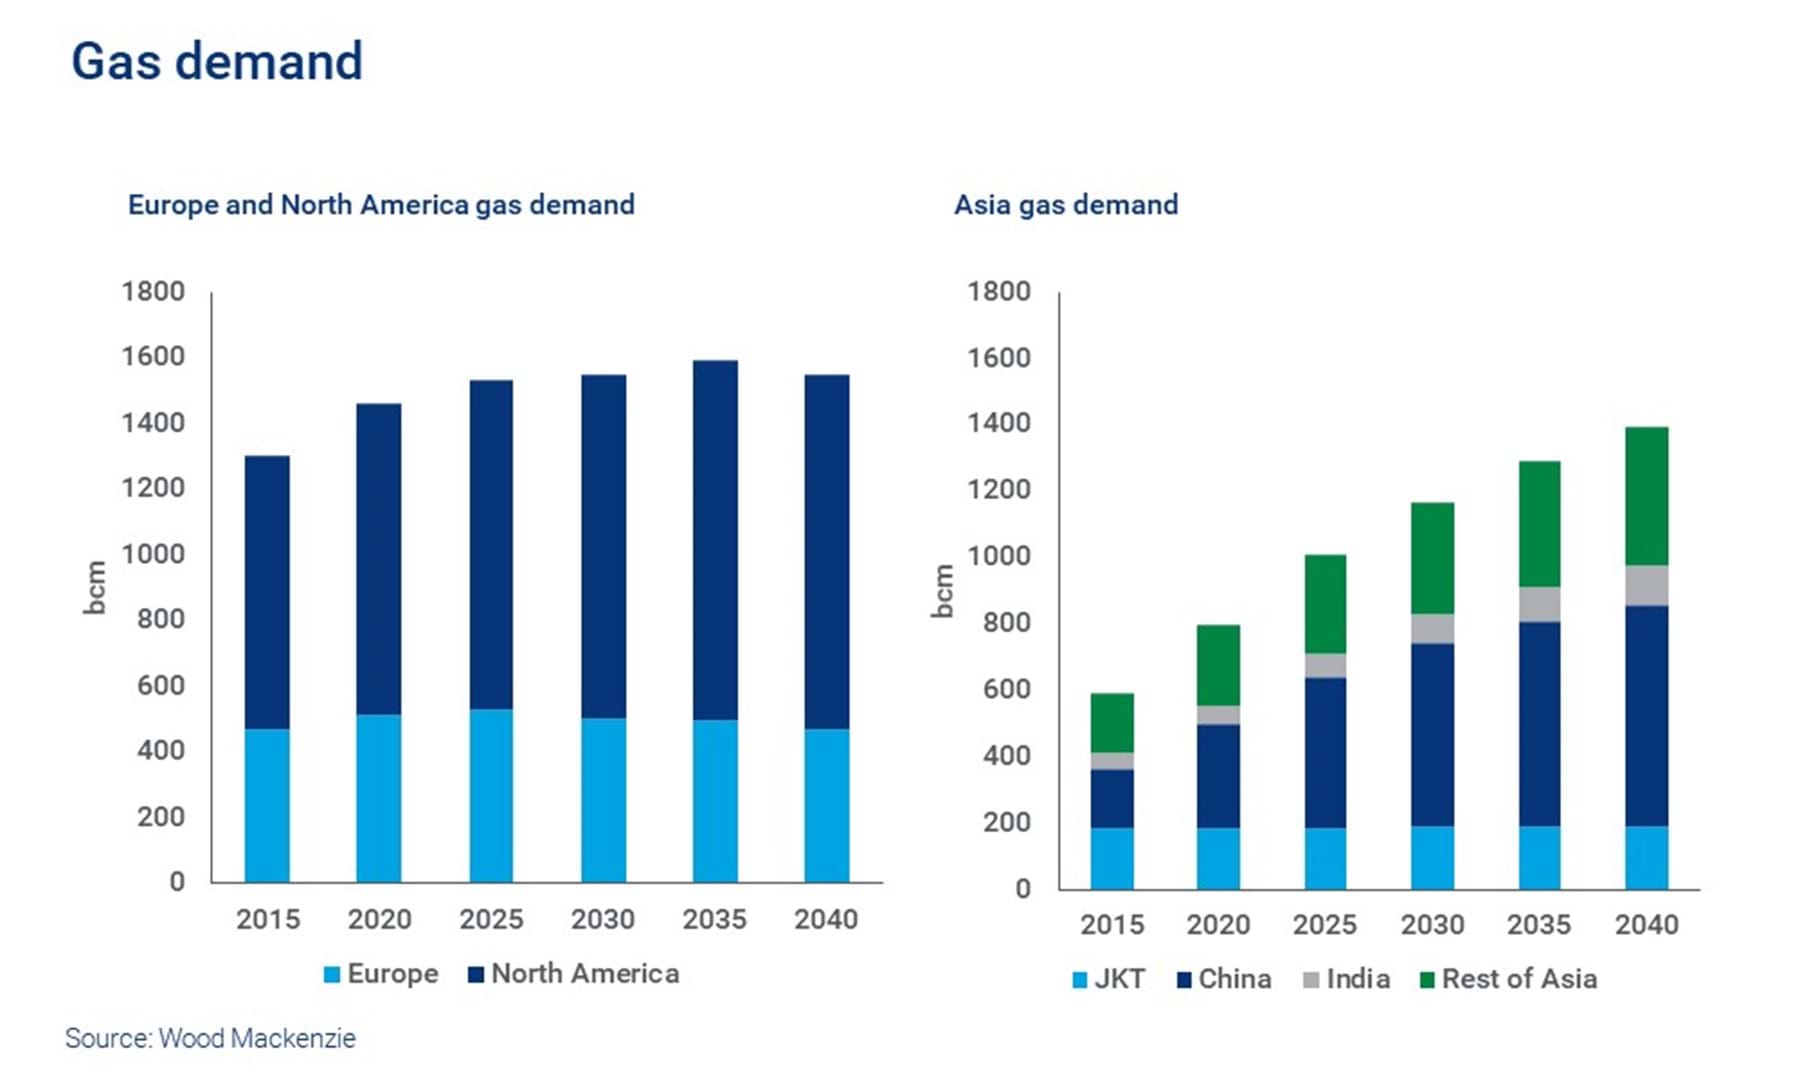 A chart showing our forecasts for gas demand in Europe, North America and Asia out to 2040